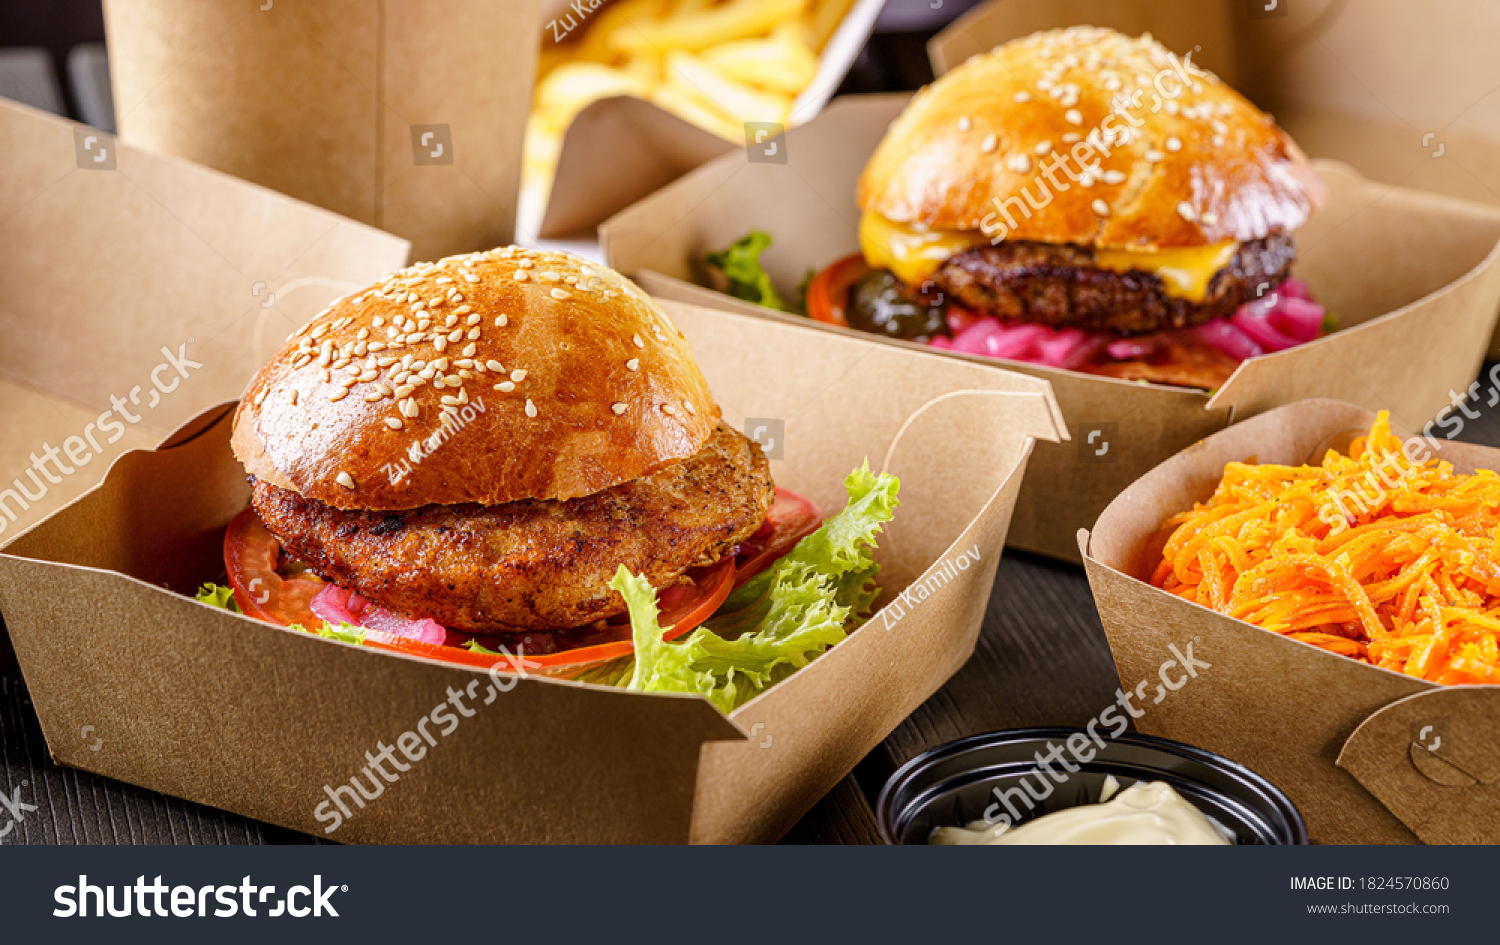 Street food. Meat cutlet burgers are in paper boxes. Food delivery. #1824570860